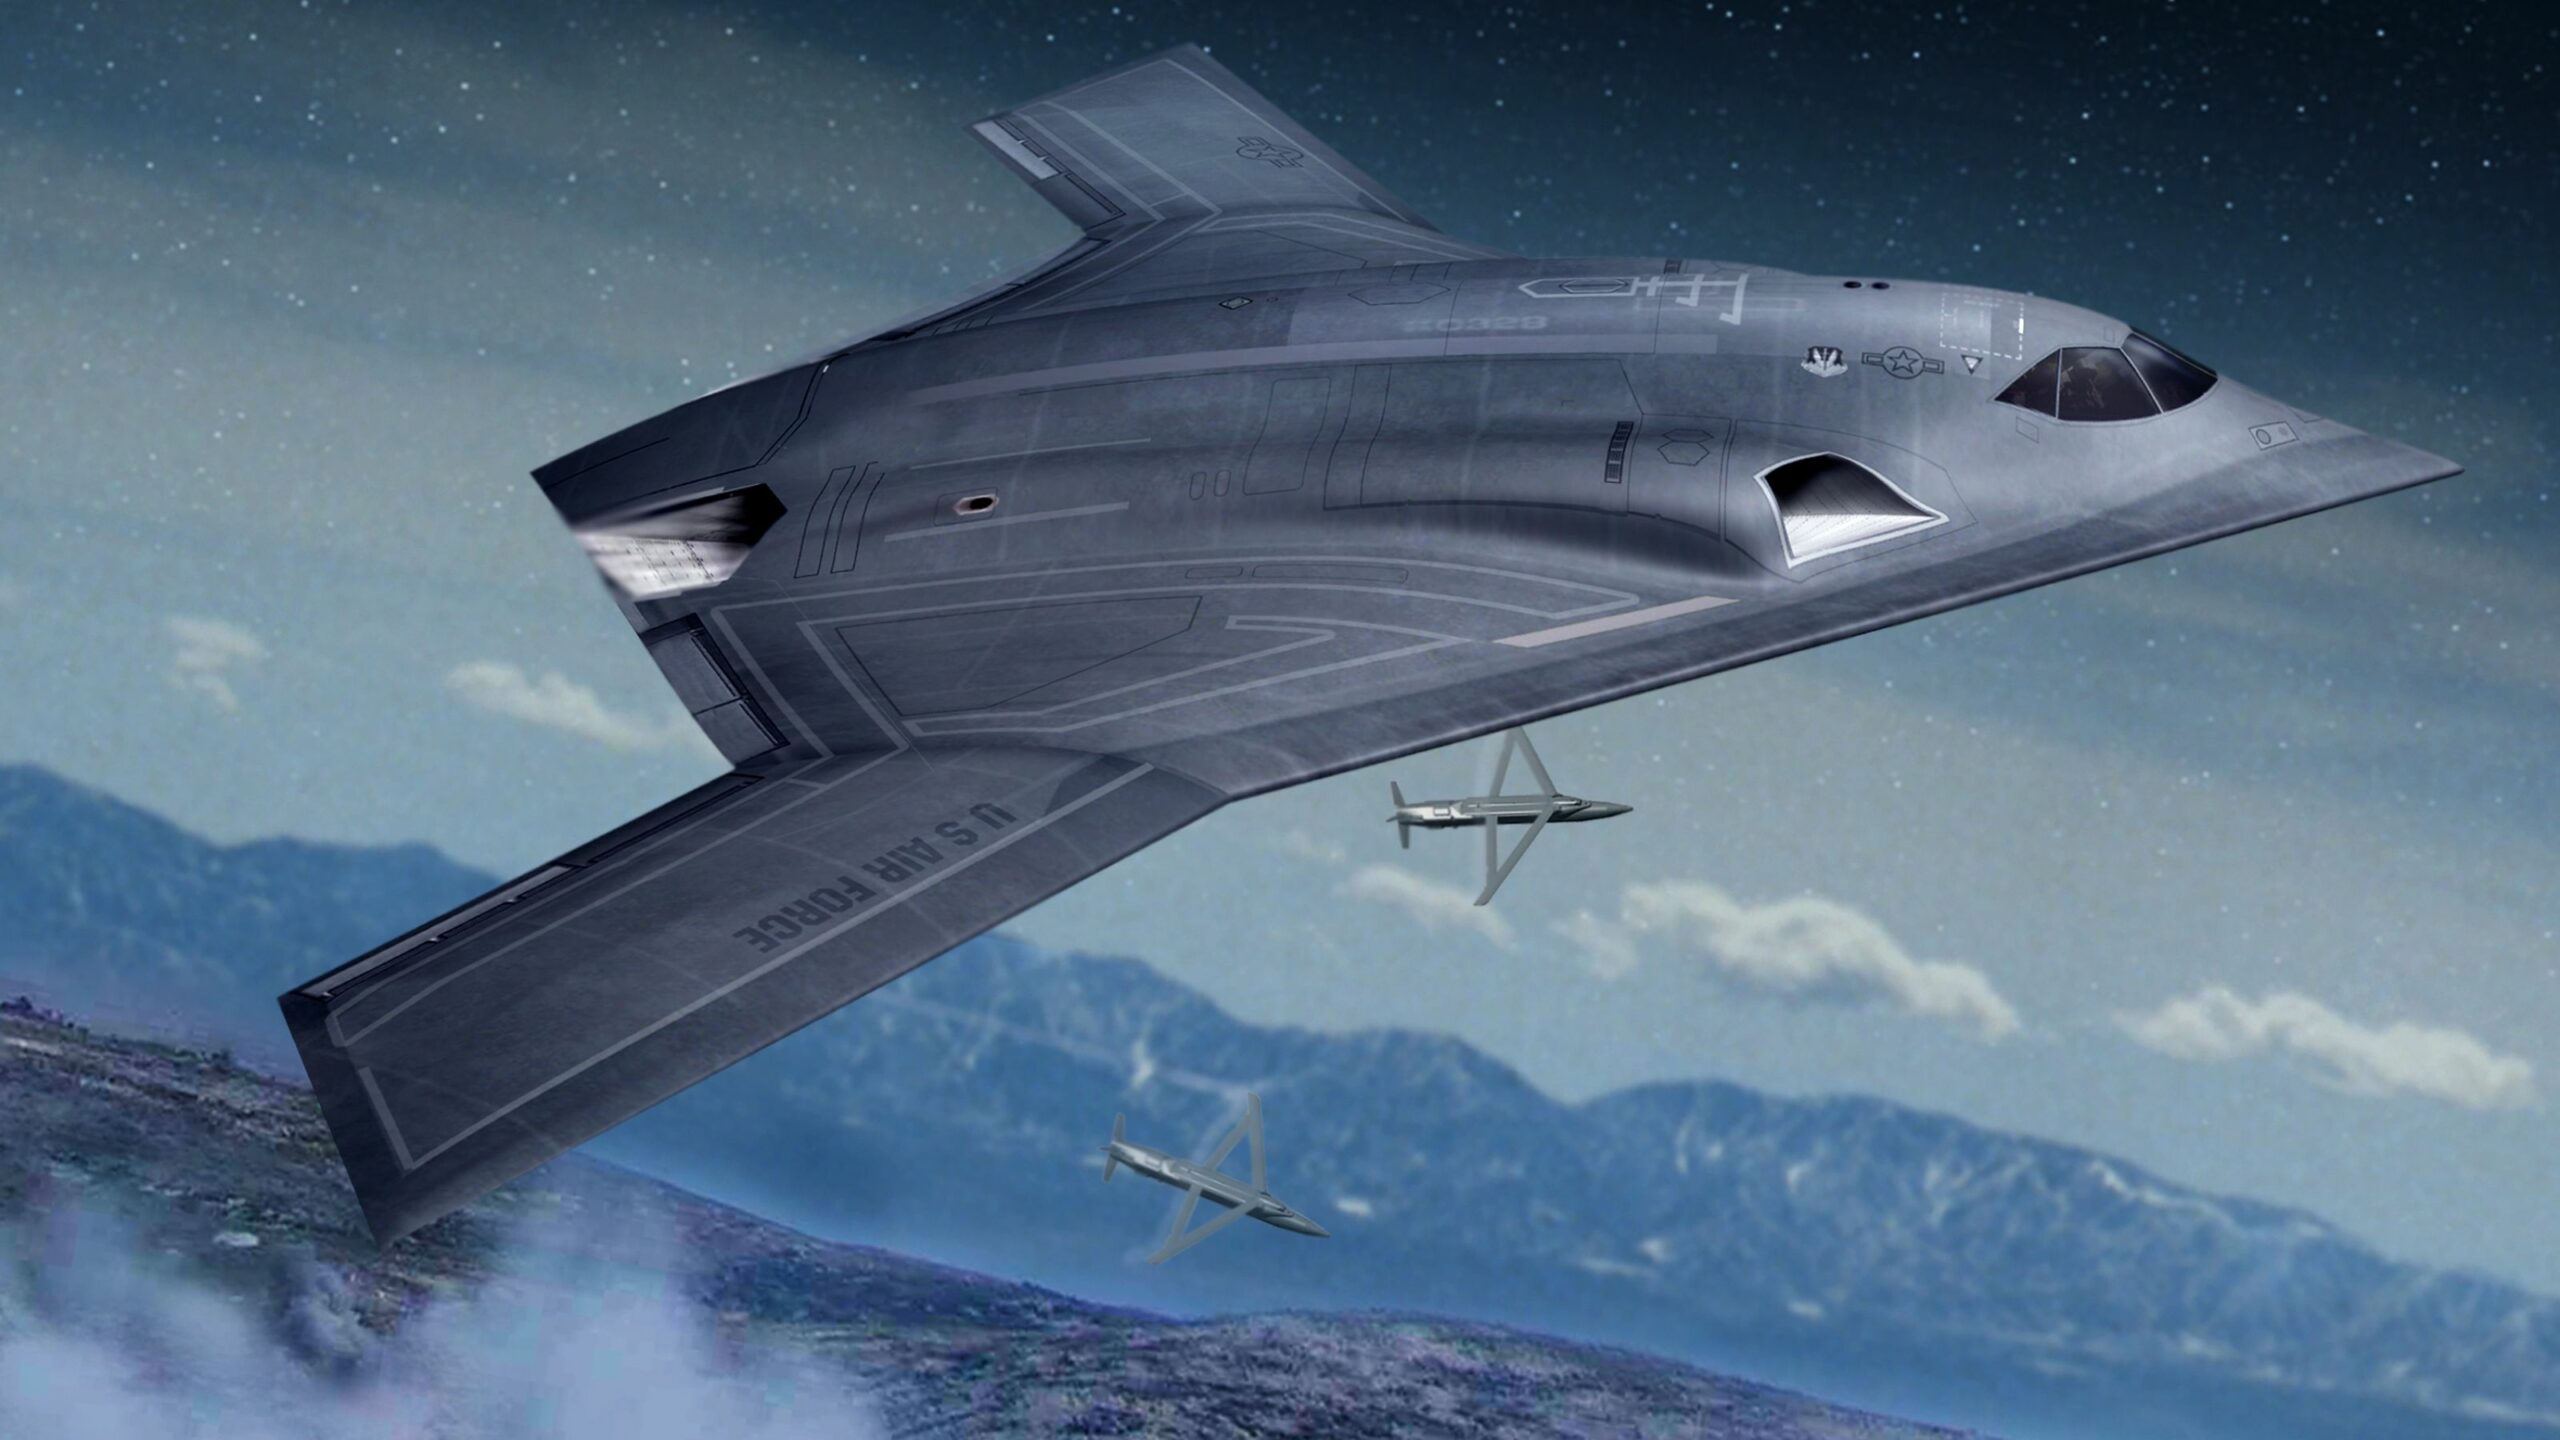 What’s So Scary About A Nuclear-Armed Drone?